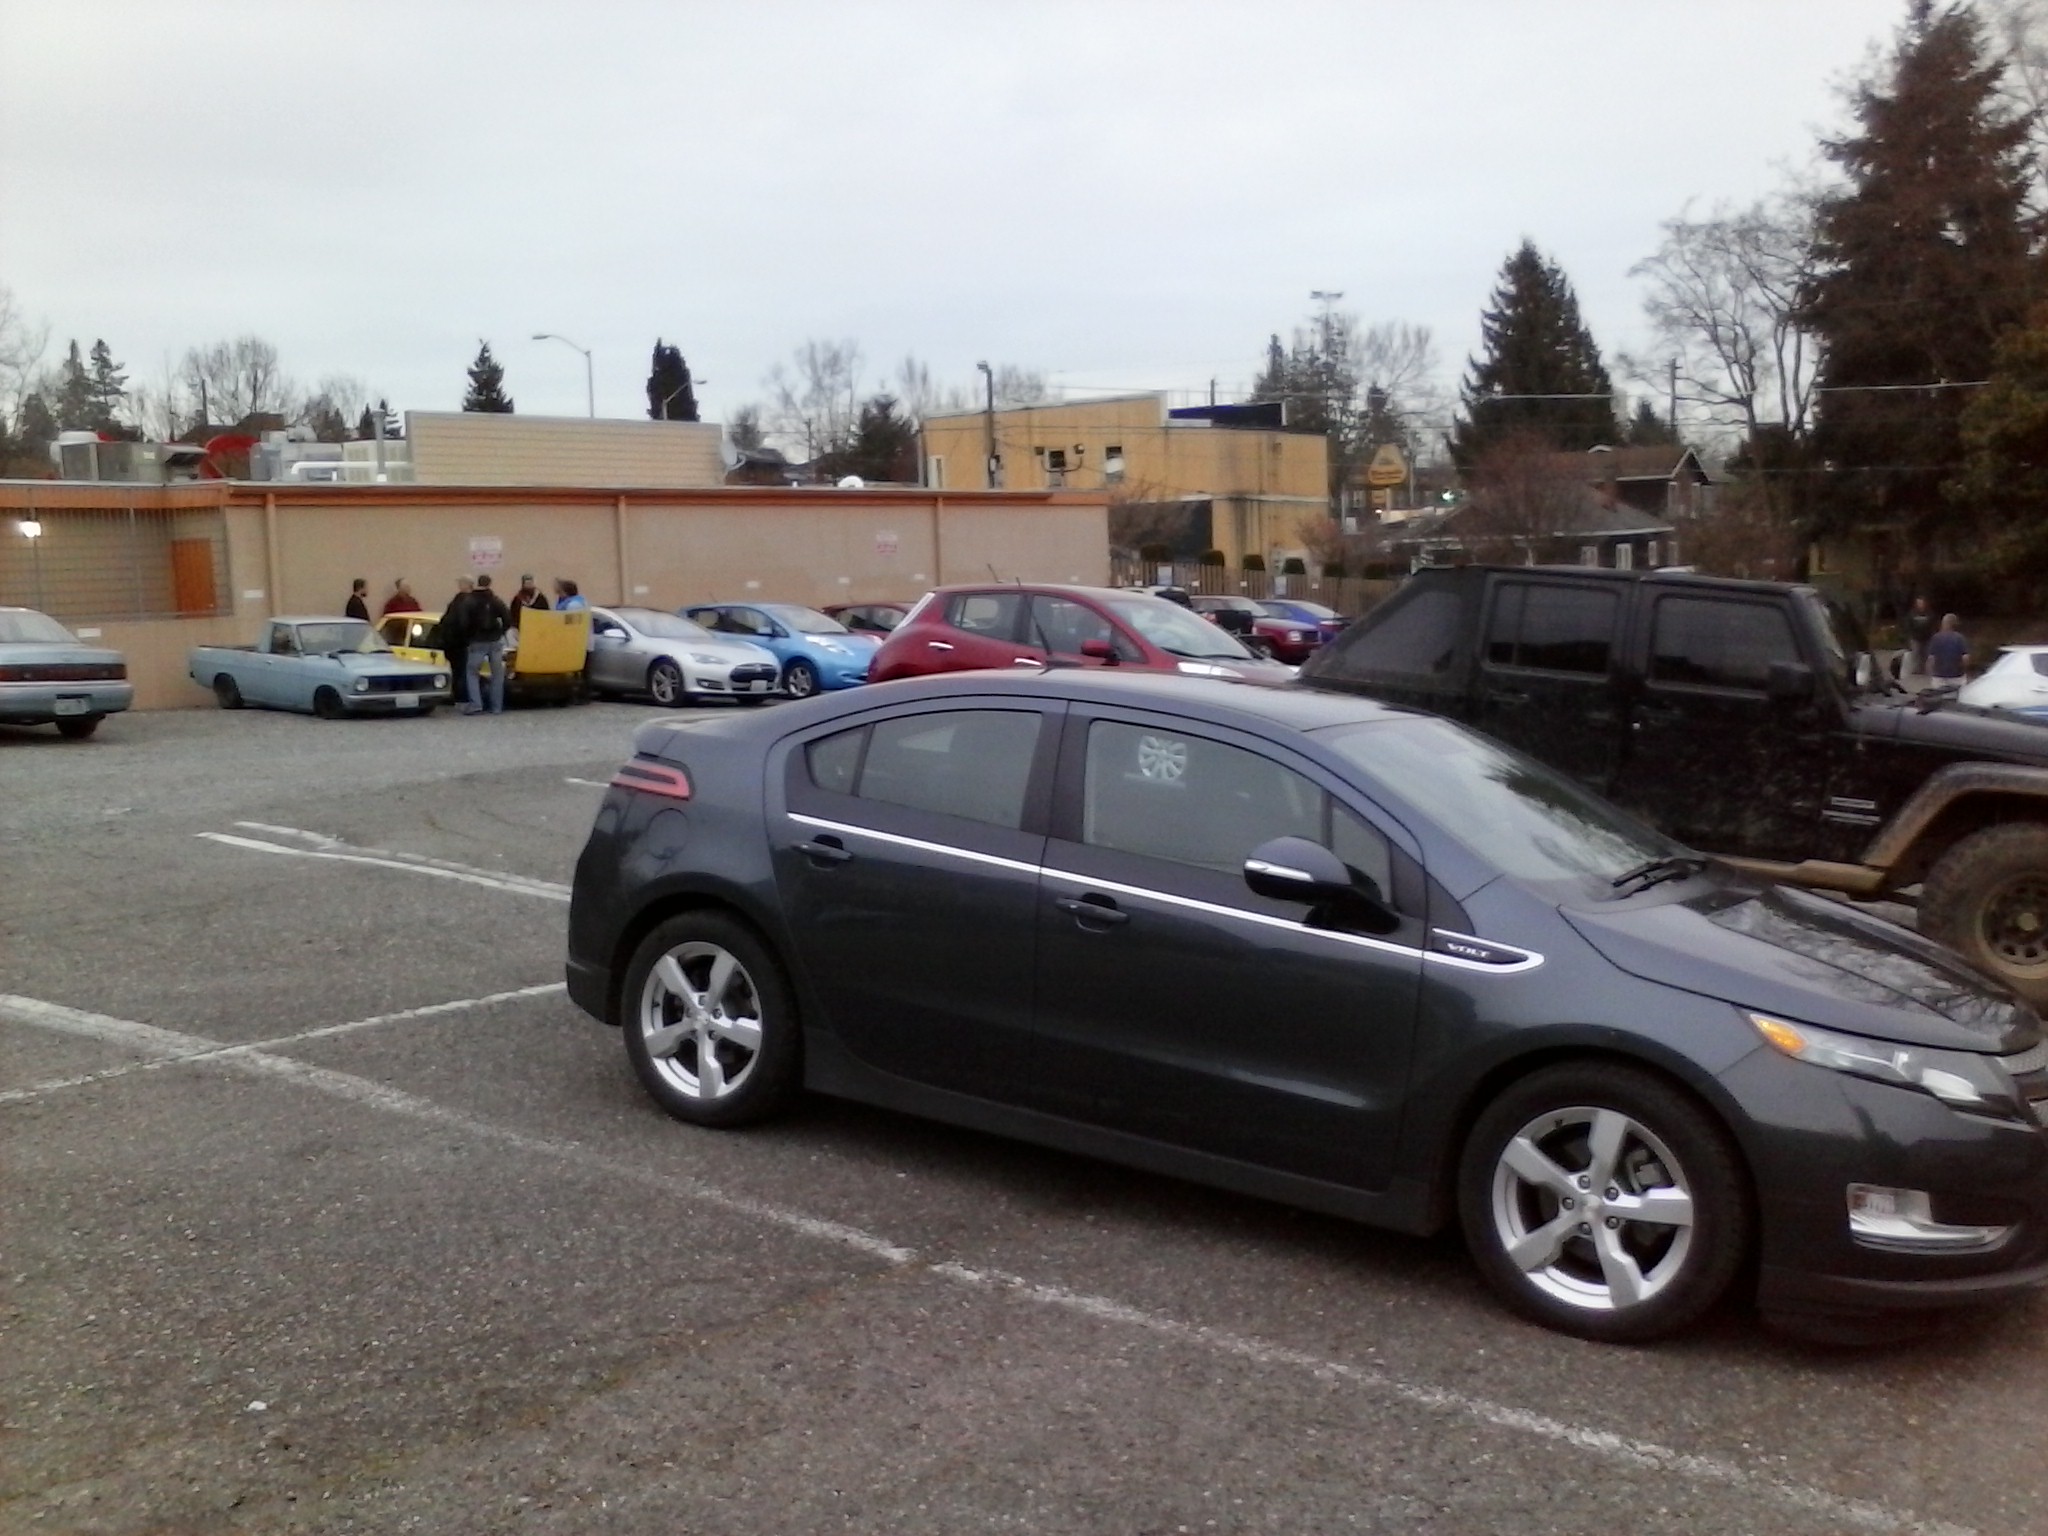 [Mar 10, 2015] SEVA Monthly Meeting (Seattle Electric Vehicle